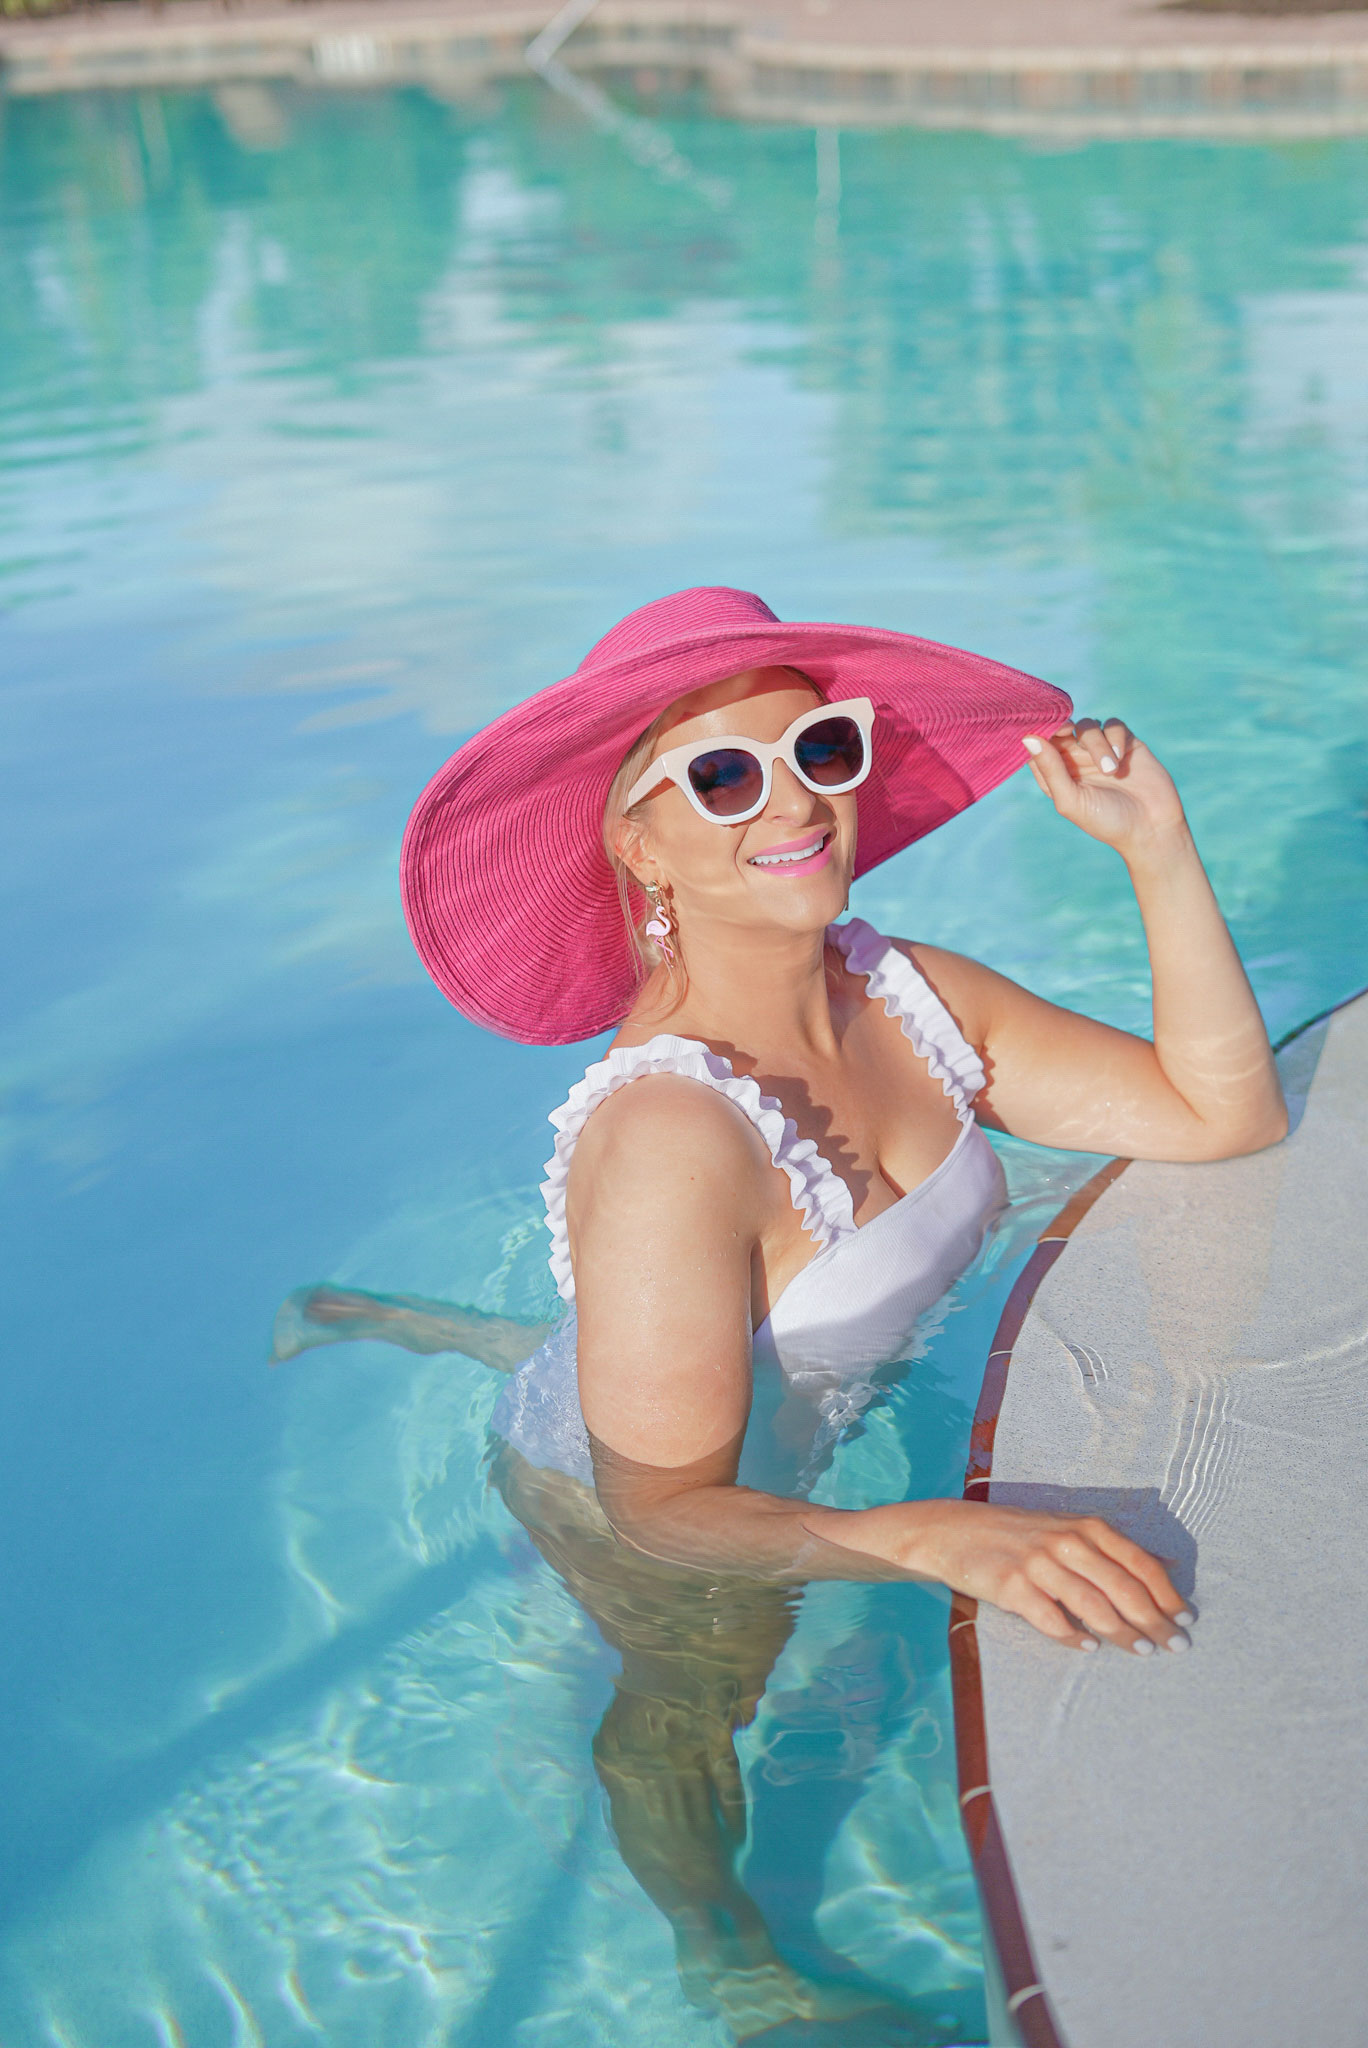 Florida Blogger, Jill DiGioia, The Lovely Flamingo wears pink flamingo earrings from her new beach earring collection along with pink sunglasses and a pink straw hat.